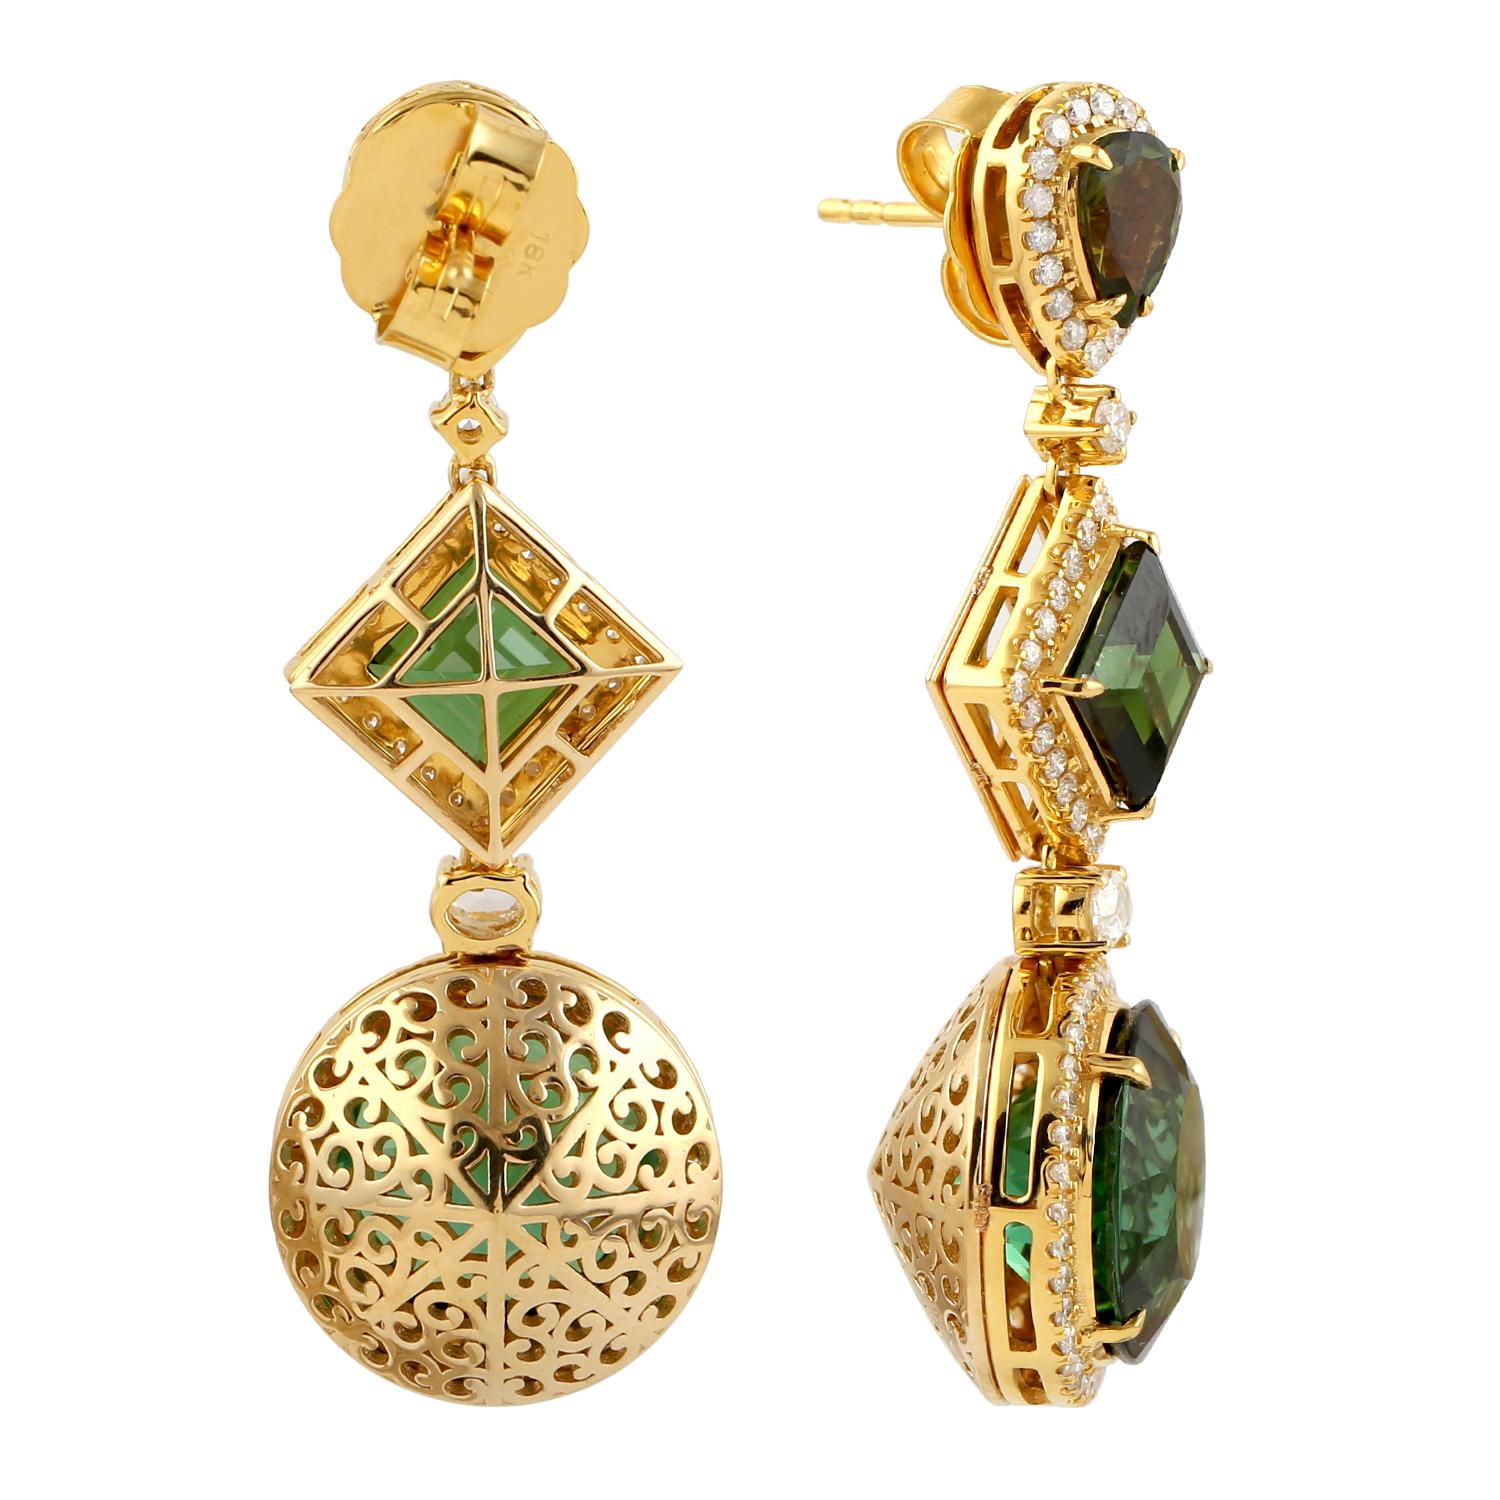 Mixed Cut Three Tier Multi Shaped Green Tourmaline Earrings With Diamonds In 18k Gold For Sale